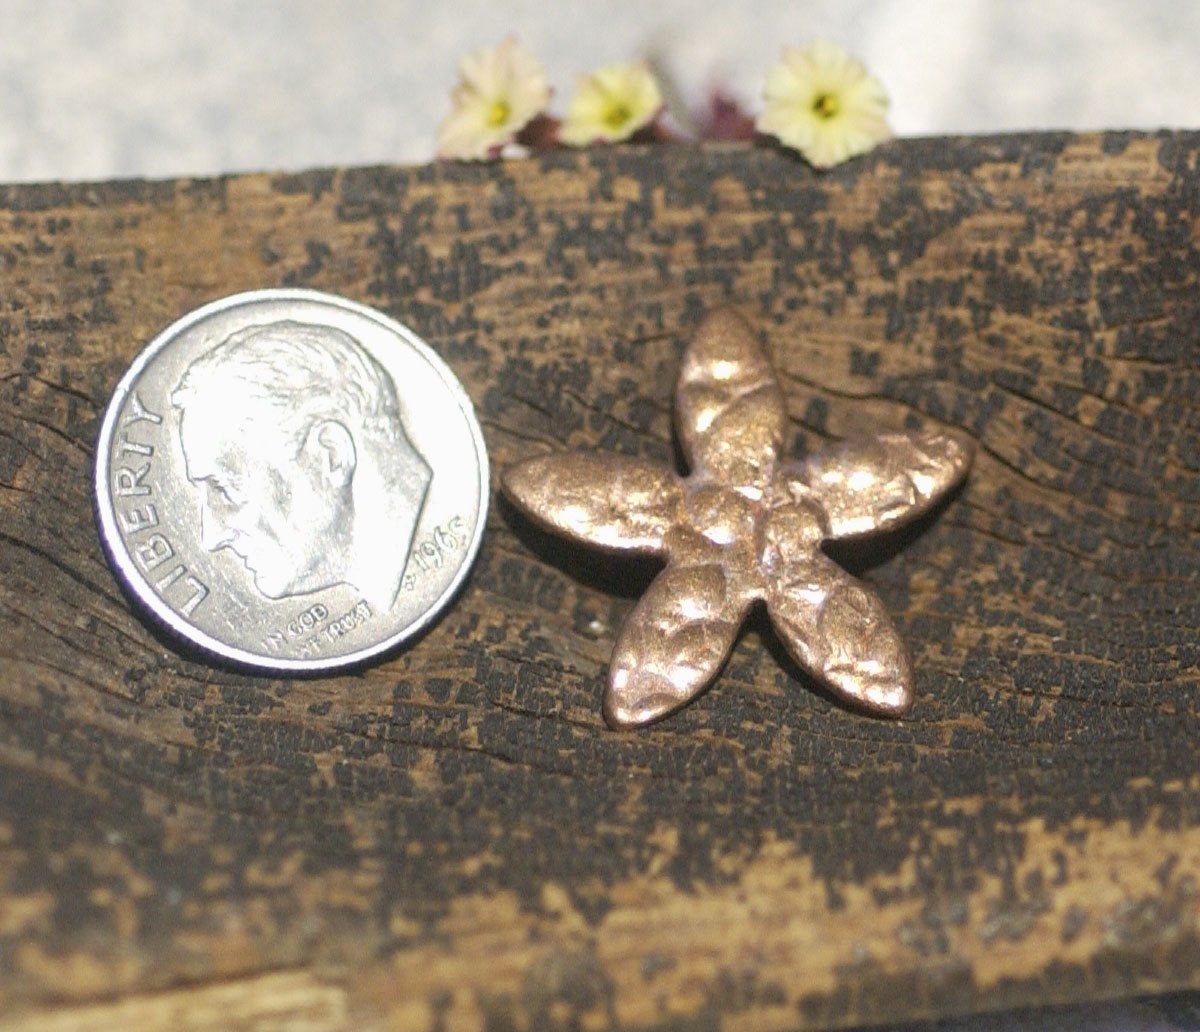 Small 5 Petal Flower Antique Hammered 21mm 20g for Blanks Enameling Stamping Texturing Variety of Metals - 6 pieces